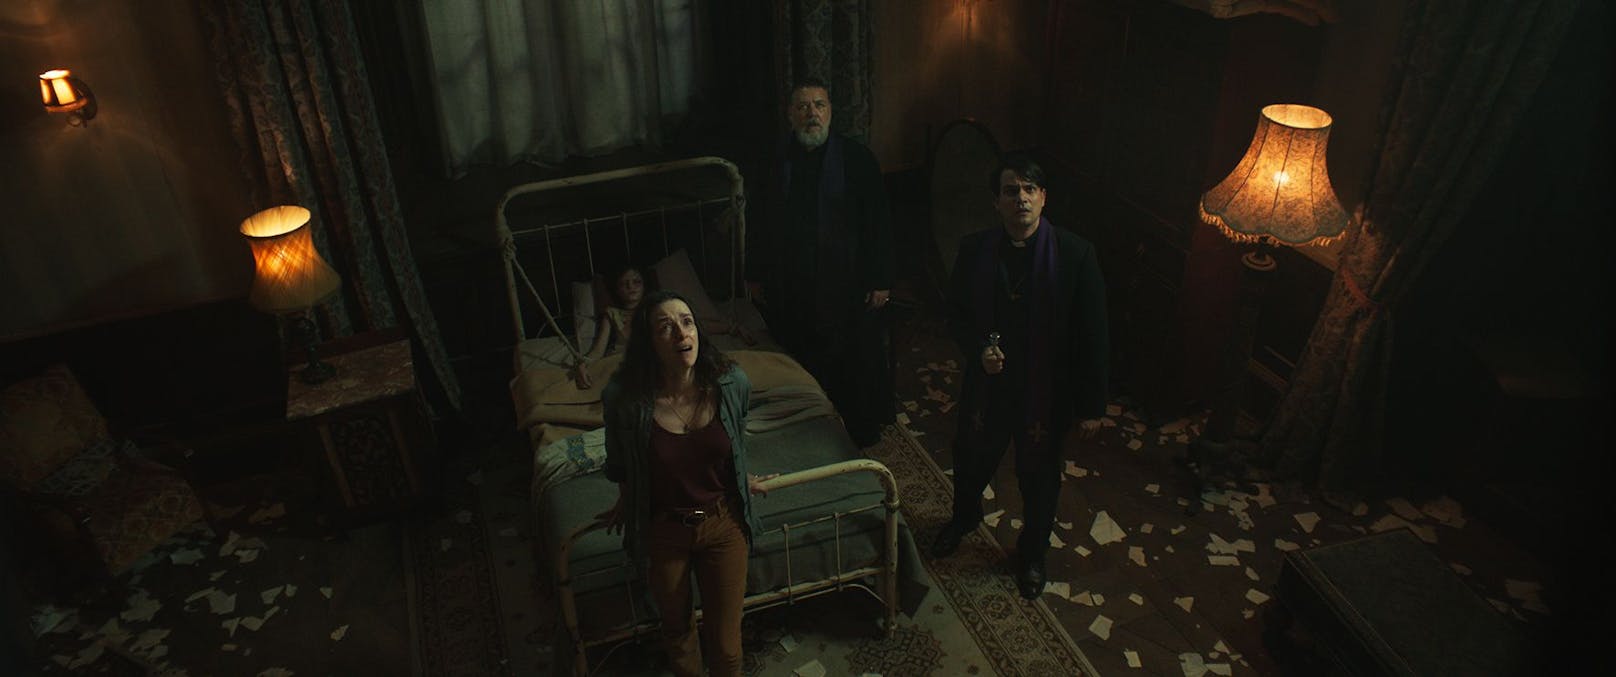 Henry (Peter DeSouza-Feighoney), Pater Gabriele Amorth (Russell Crowe), Pater Esquibel (Daniel Zovatto) und Julia (Alex Essoe) im Film "The Pope's Exorcist".